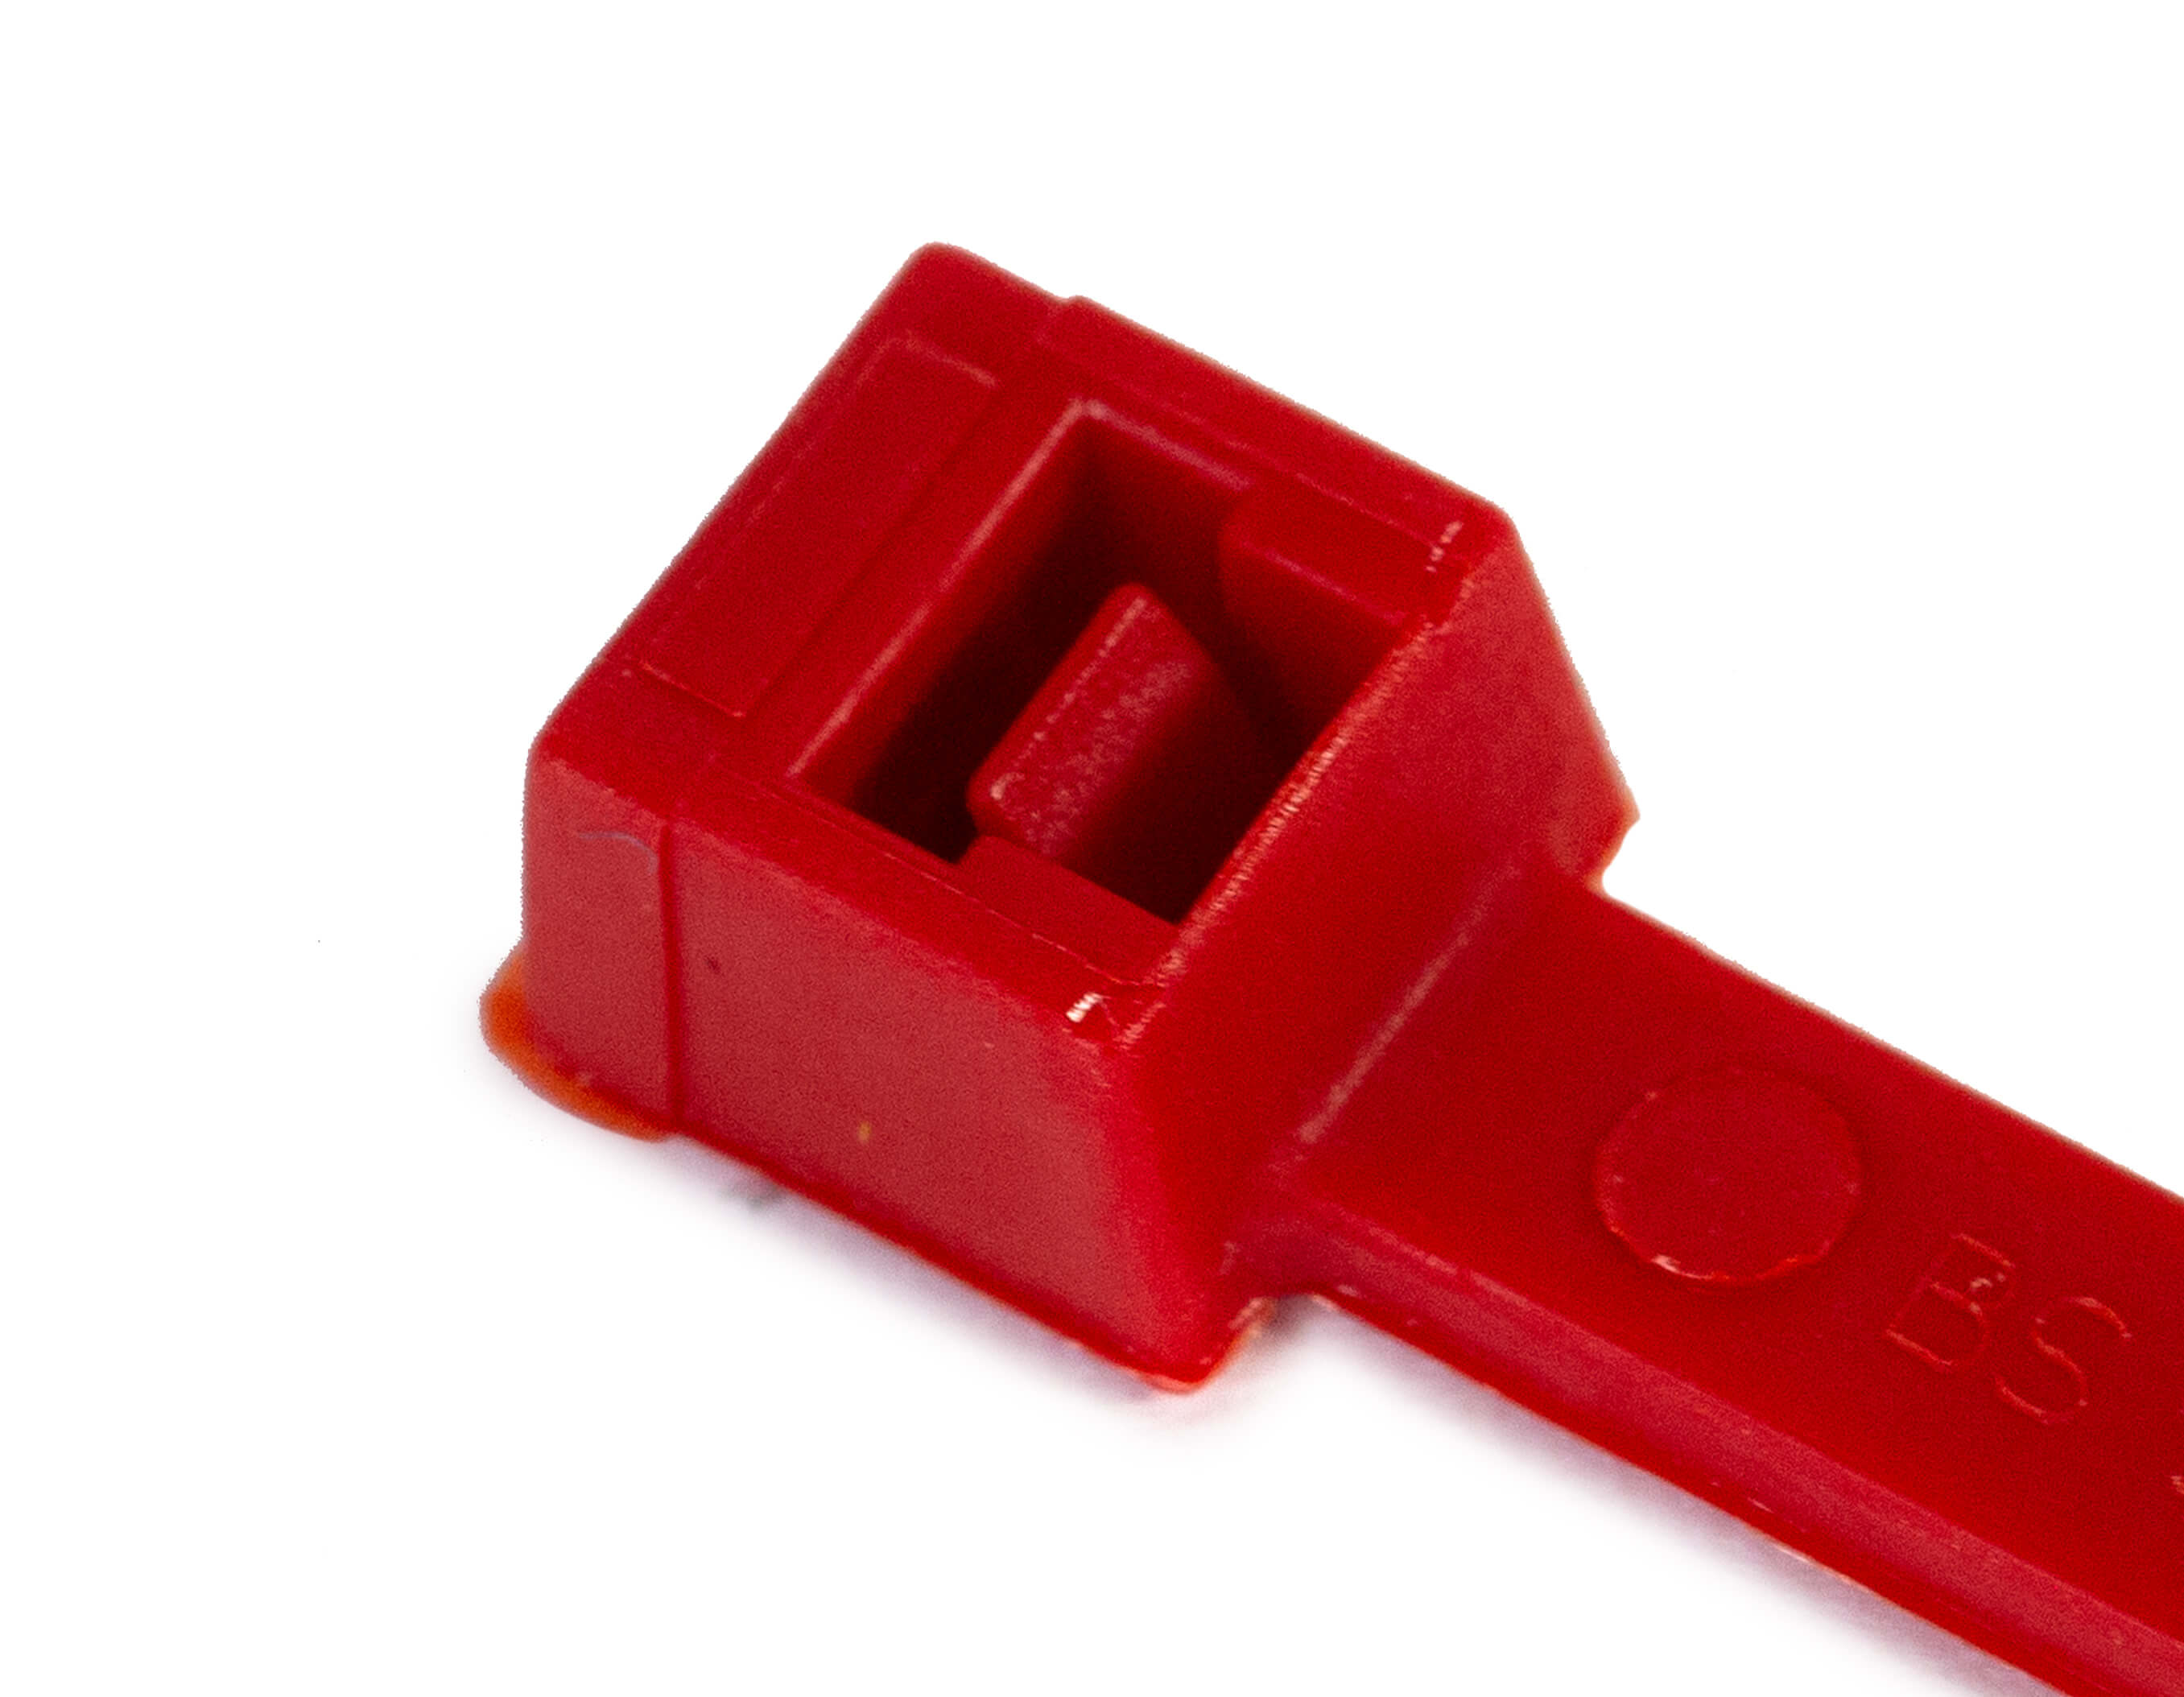 WIRE TIE PLST PLASTIC TONGUE RED   0.19"X8"